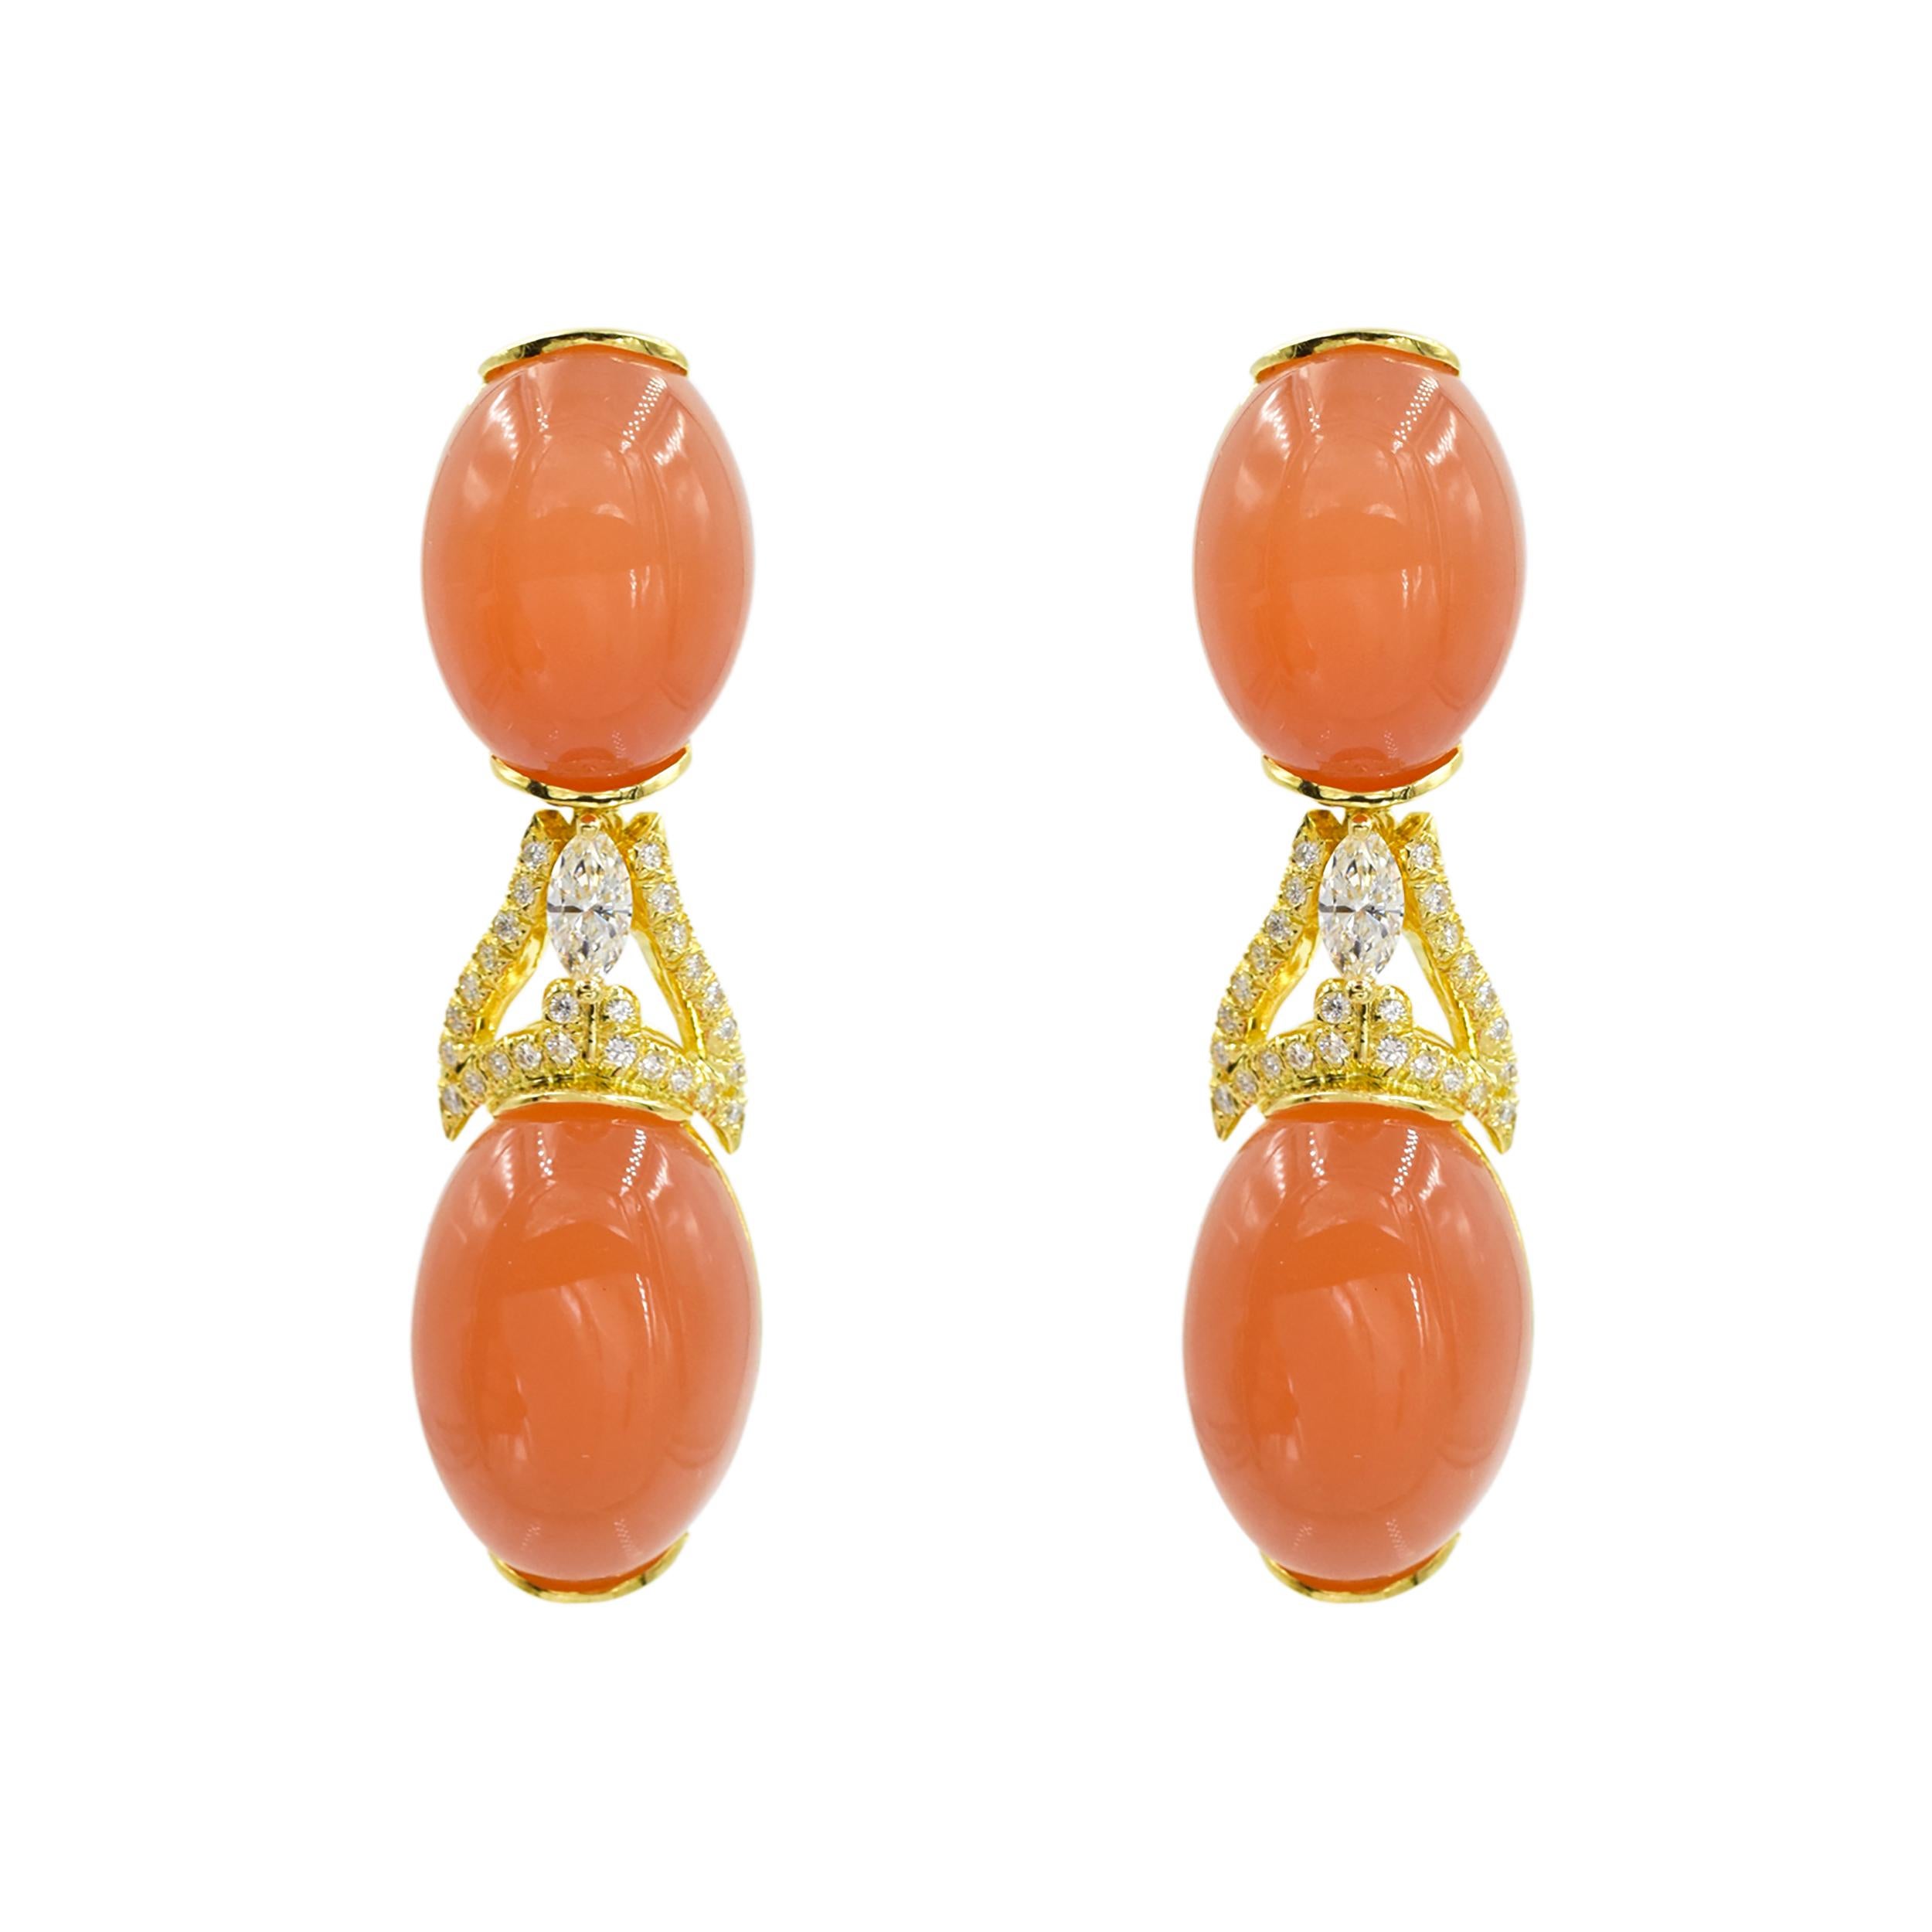 Artist Henry Dunay Tangerine Moonstone and Diamond Earrings and a Brooch Set